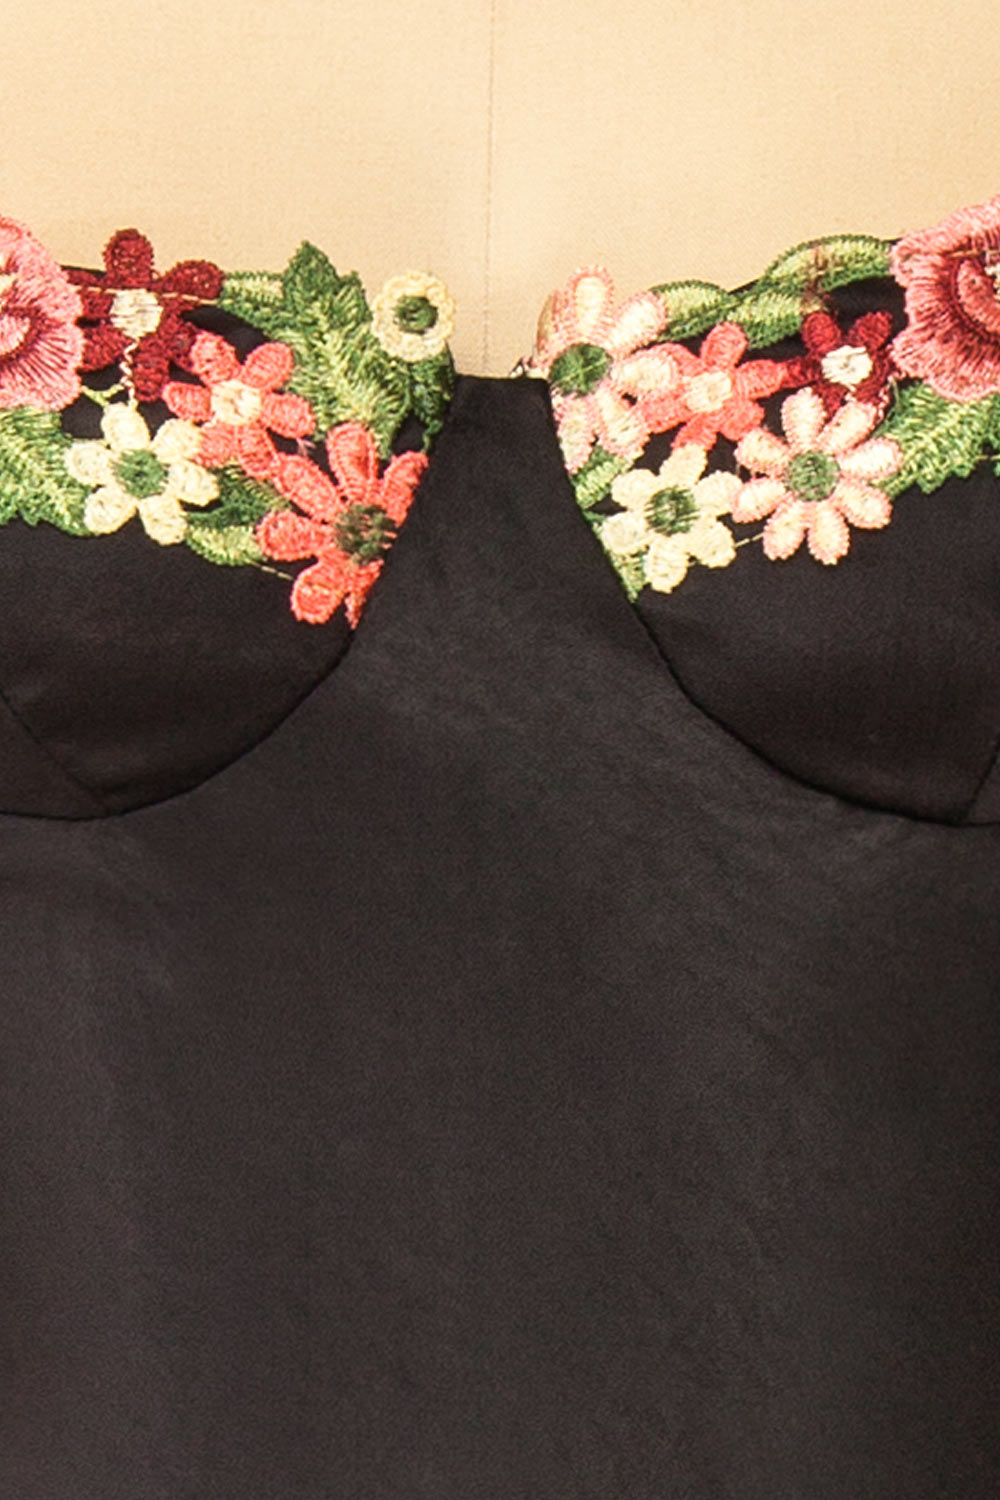 Ramona Black Slip Dress w/ Floral Embroidery | Boutique 1861 fabric 